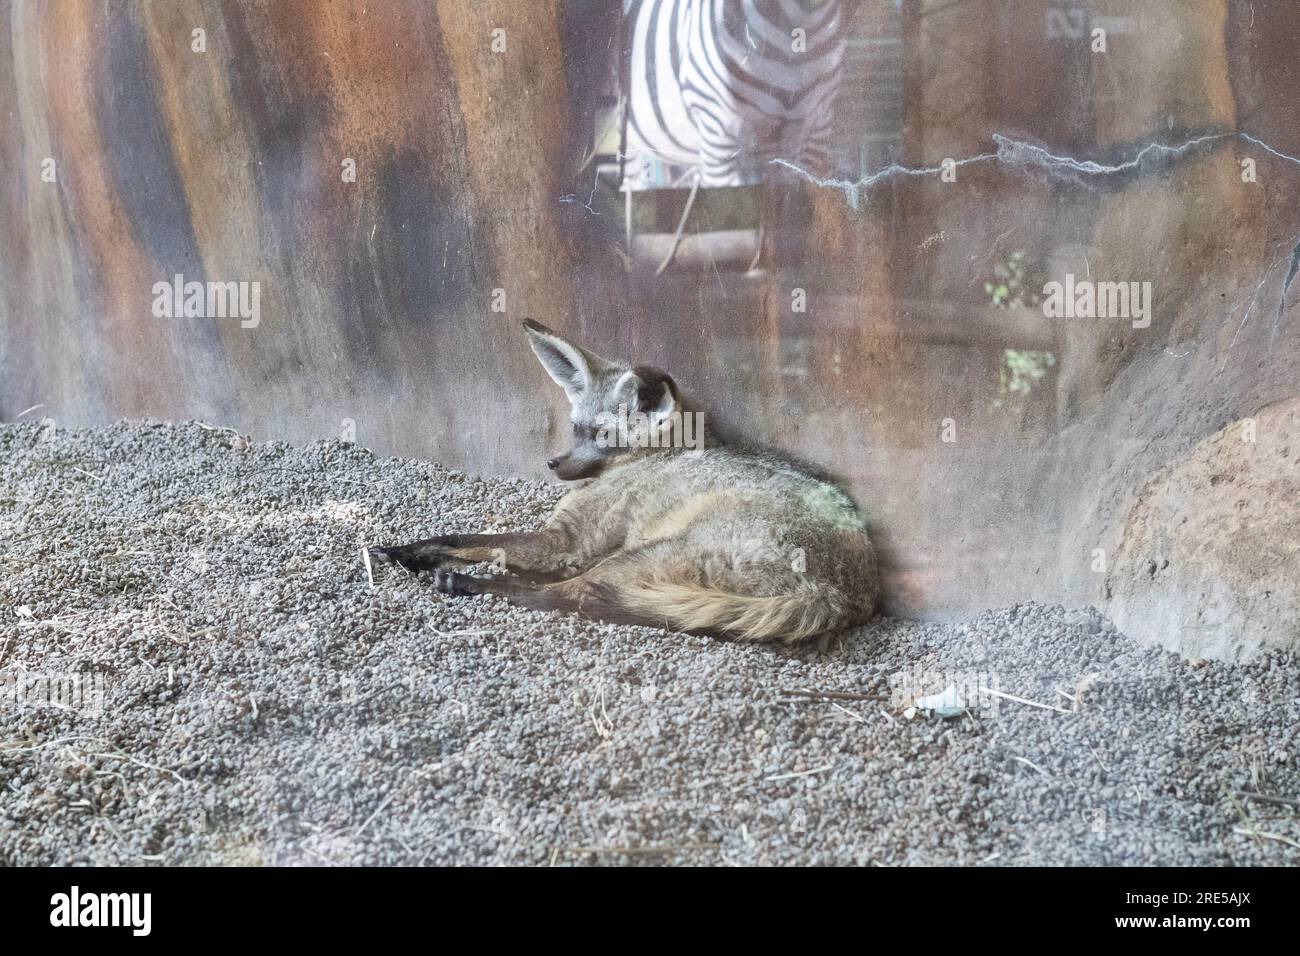 This Bat eared fox is at the Knoxville Zoo Stock Photo